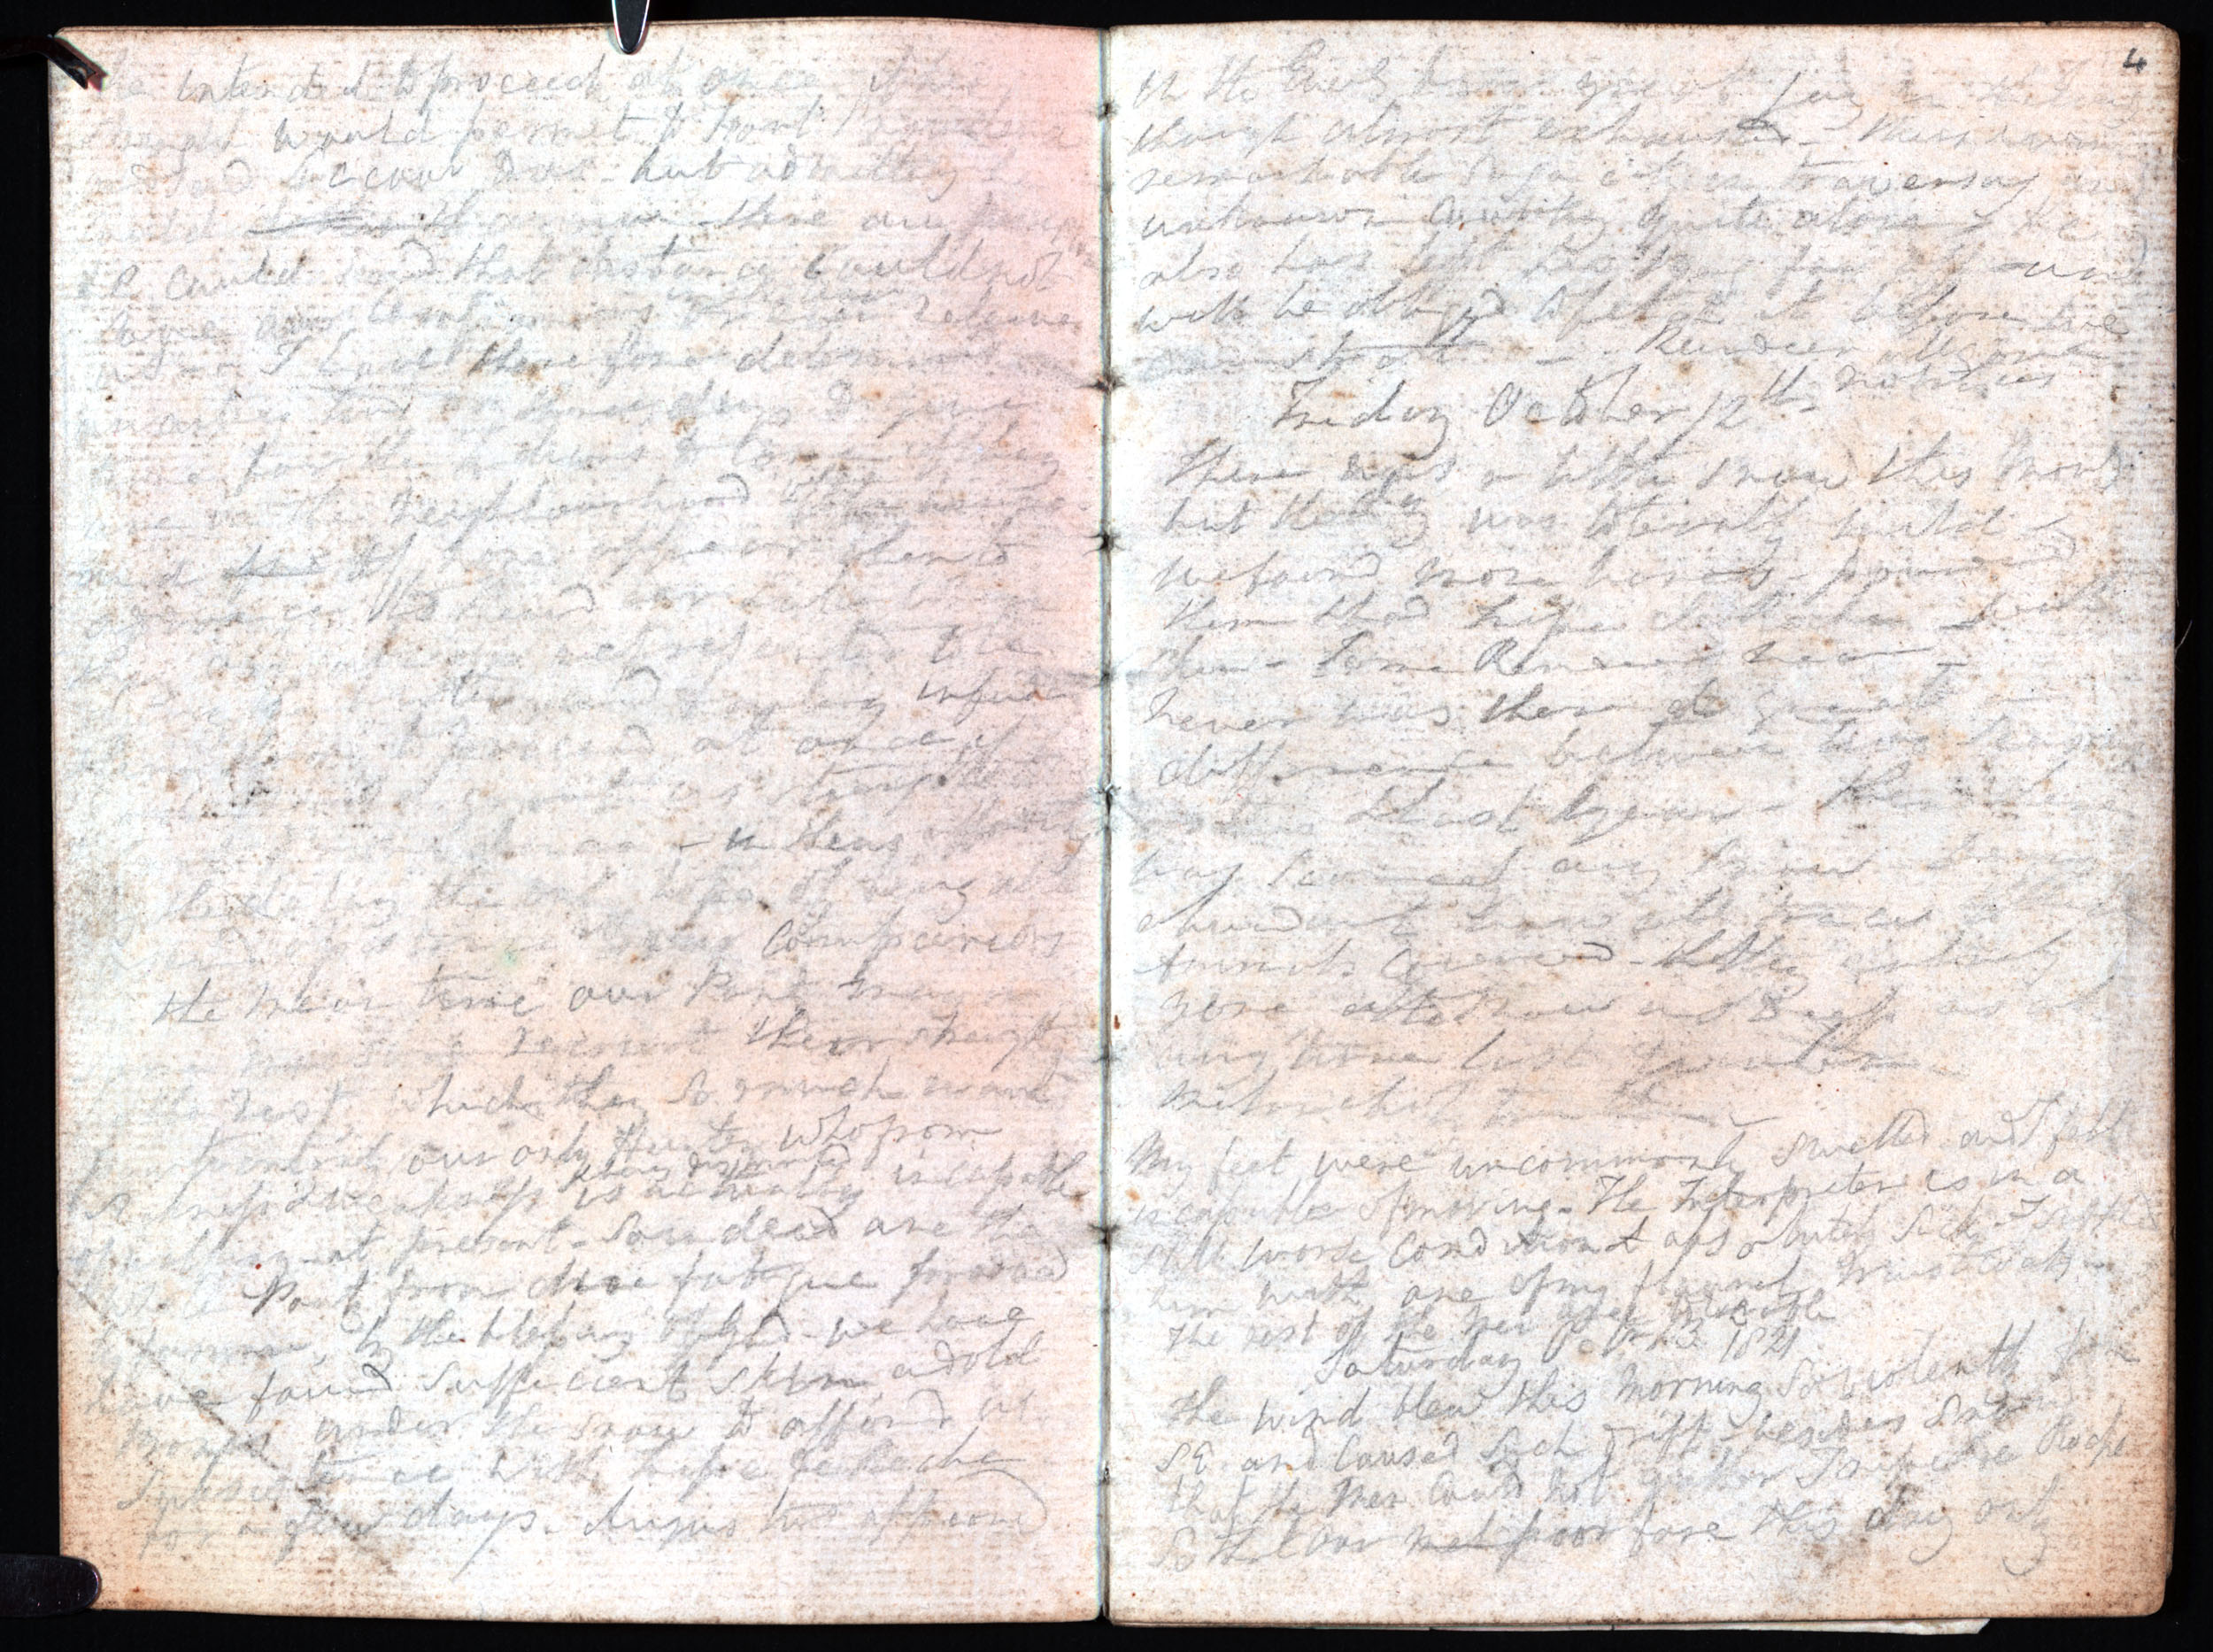 An image of two pages of Sir John Franklin's 1821 Field Diary (National Library of Scotland MS. 42237). Copyright National Library of Scotland. Creative Commons Attribution-NonCommercial 3.0 Unported (https://creativecommons.org/licenses/by-nc/3.0/).